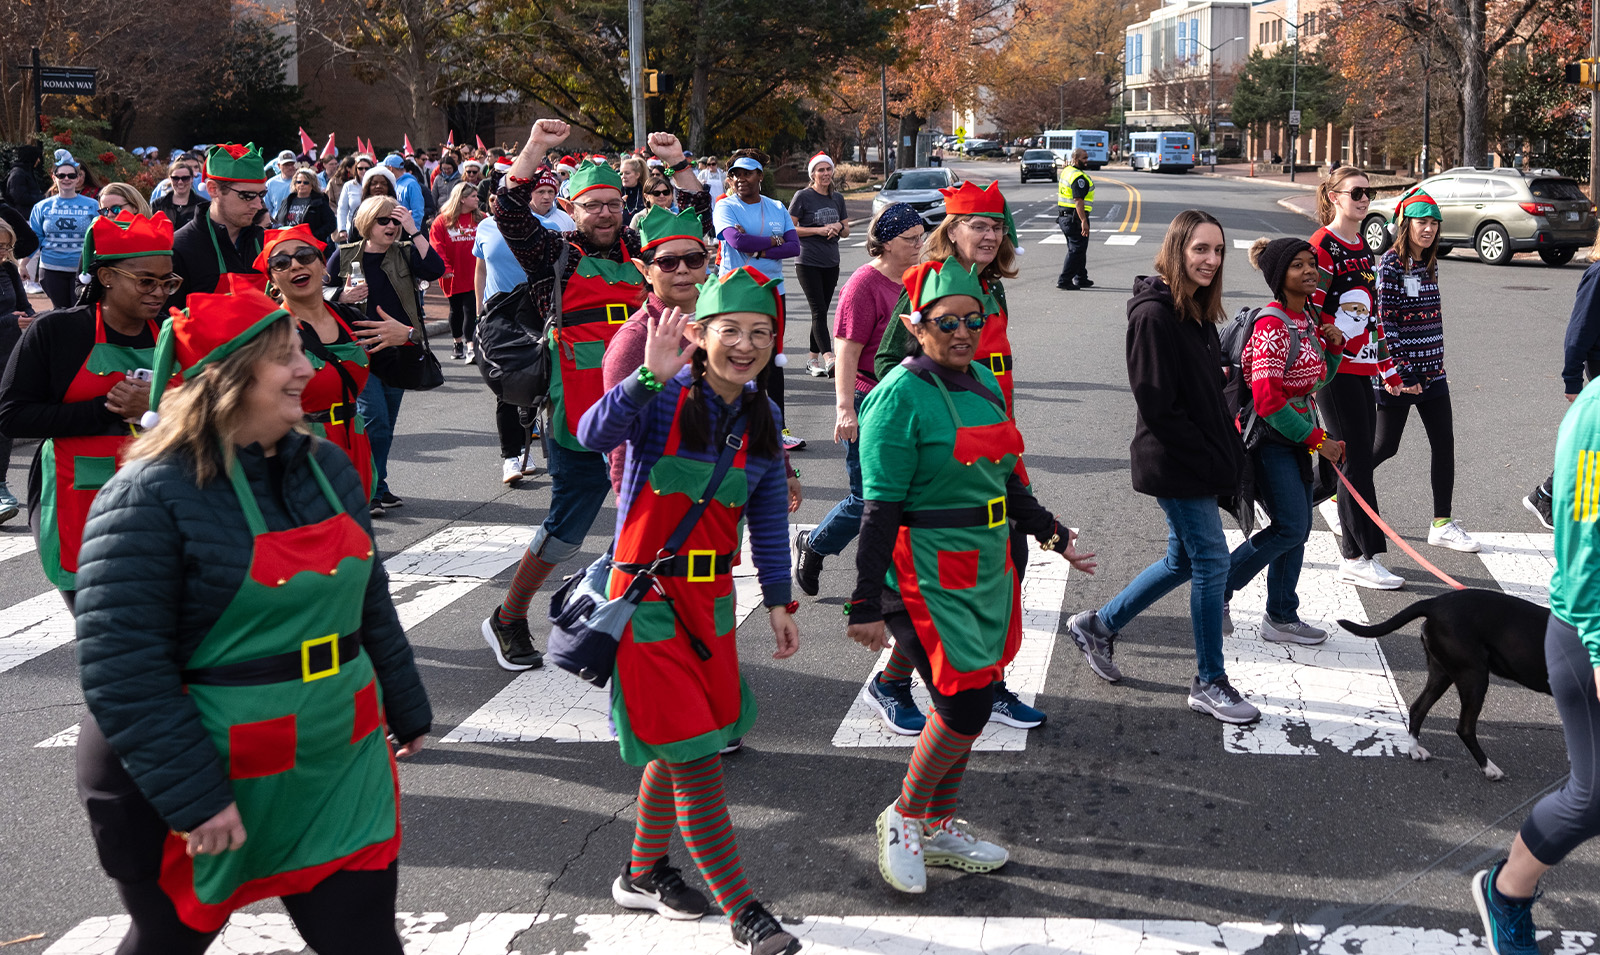 A group of walkers, some dressed up as elves, waving as they cross the street.